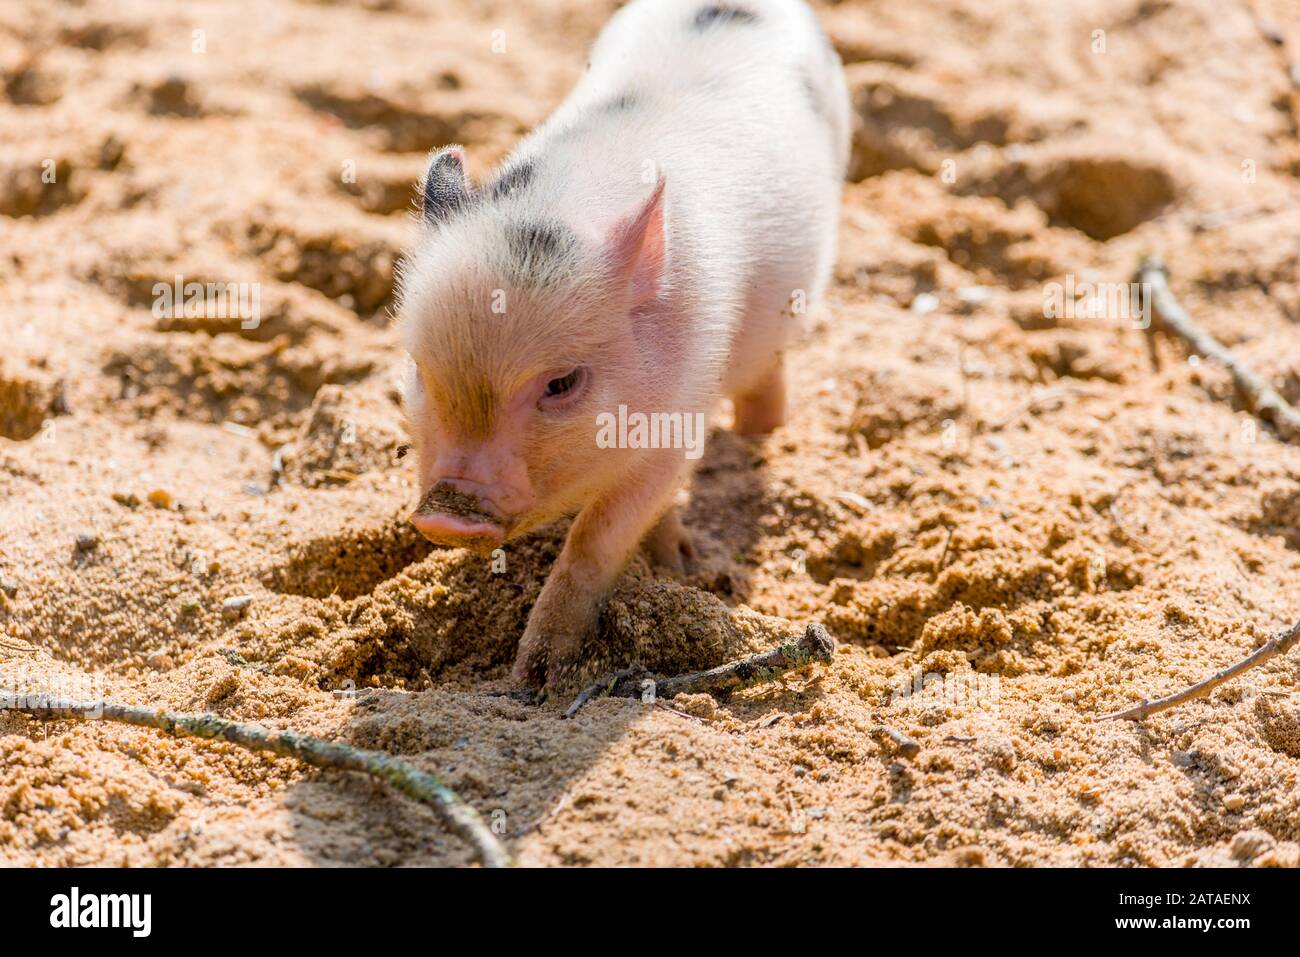 Cute Little Pig playing in the backyard. Baby pig Stock Photo